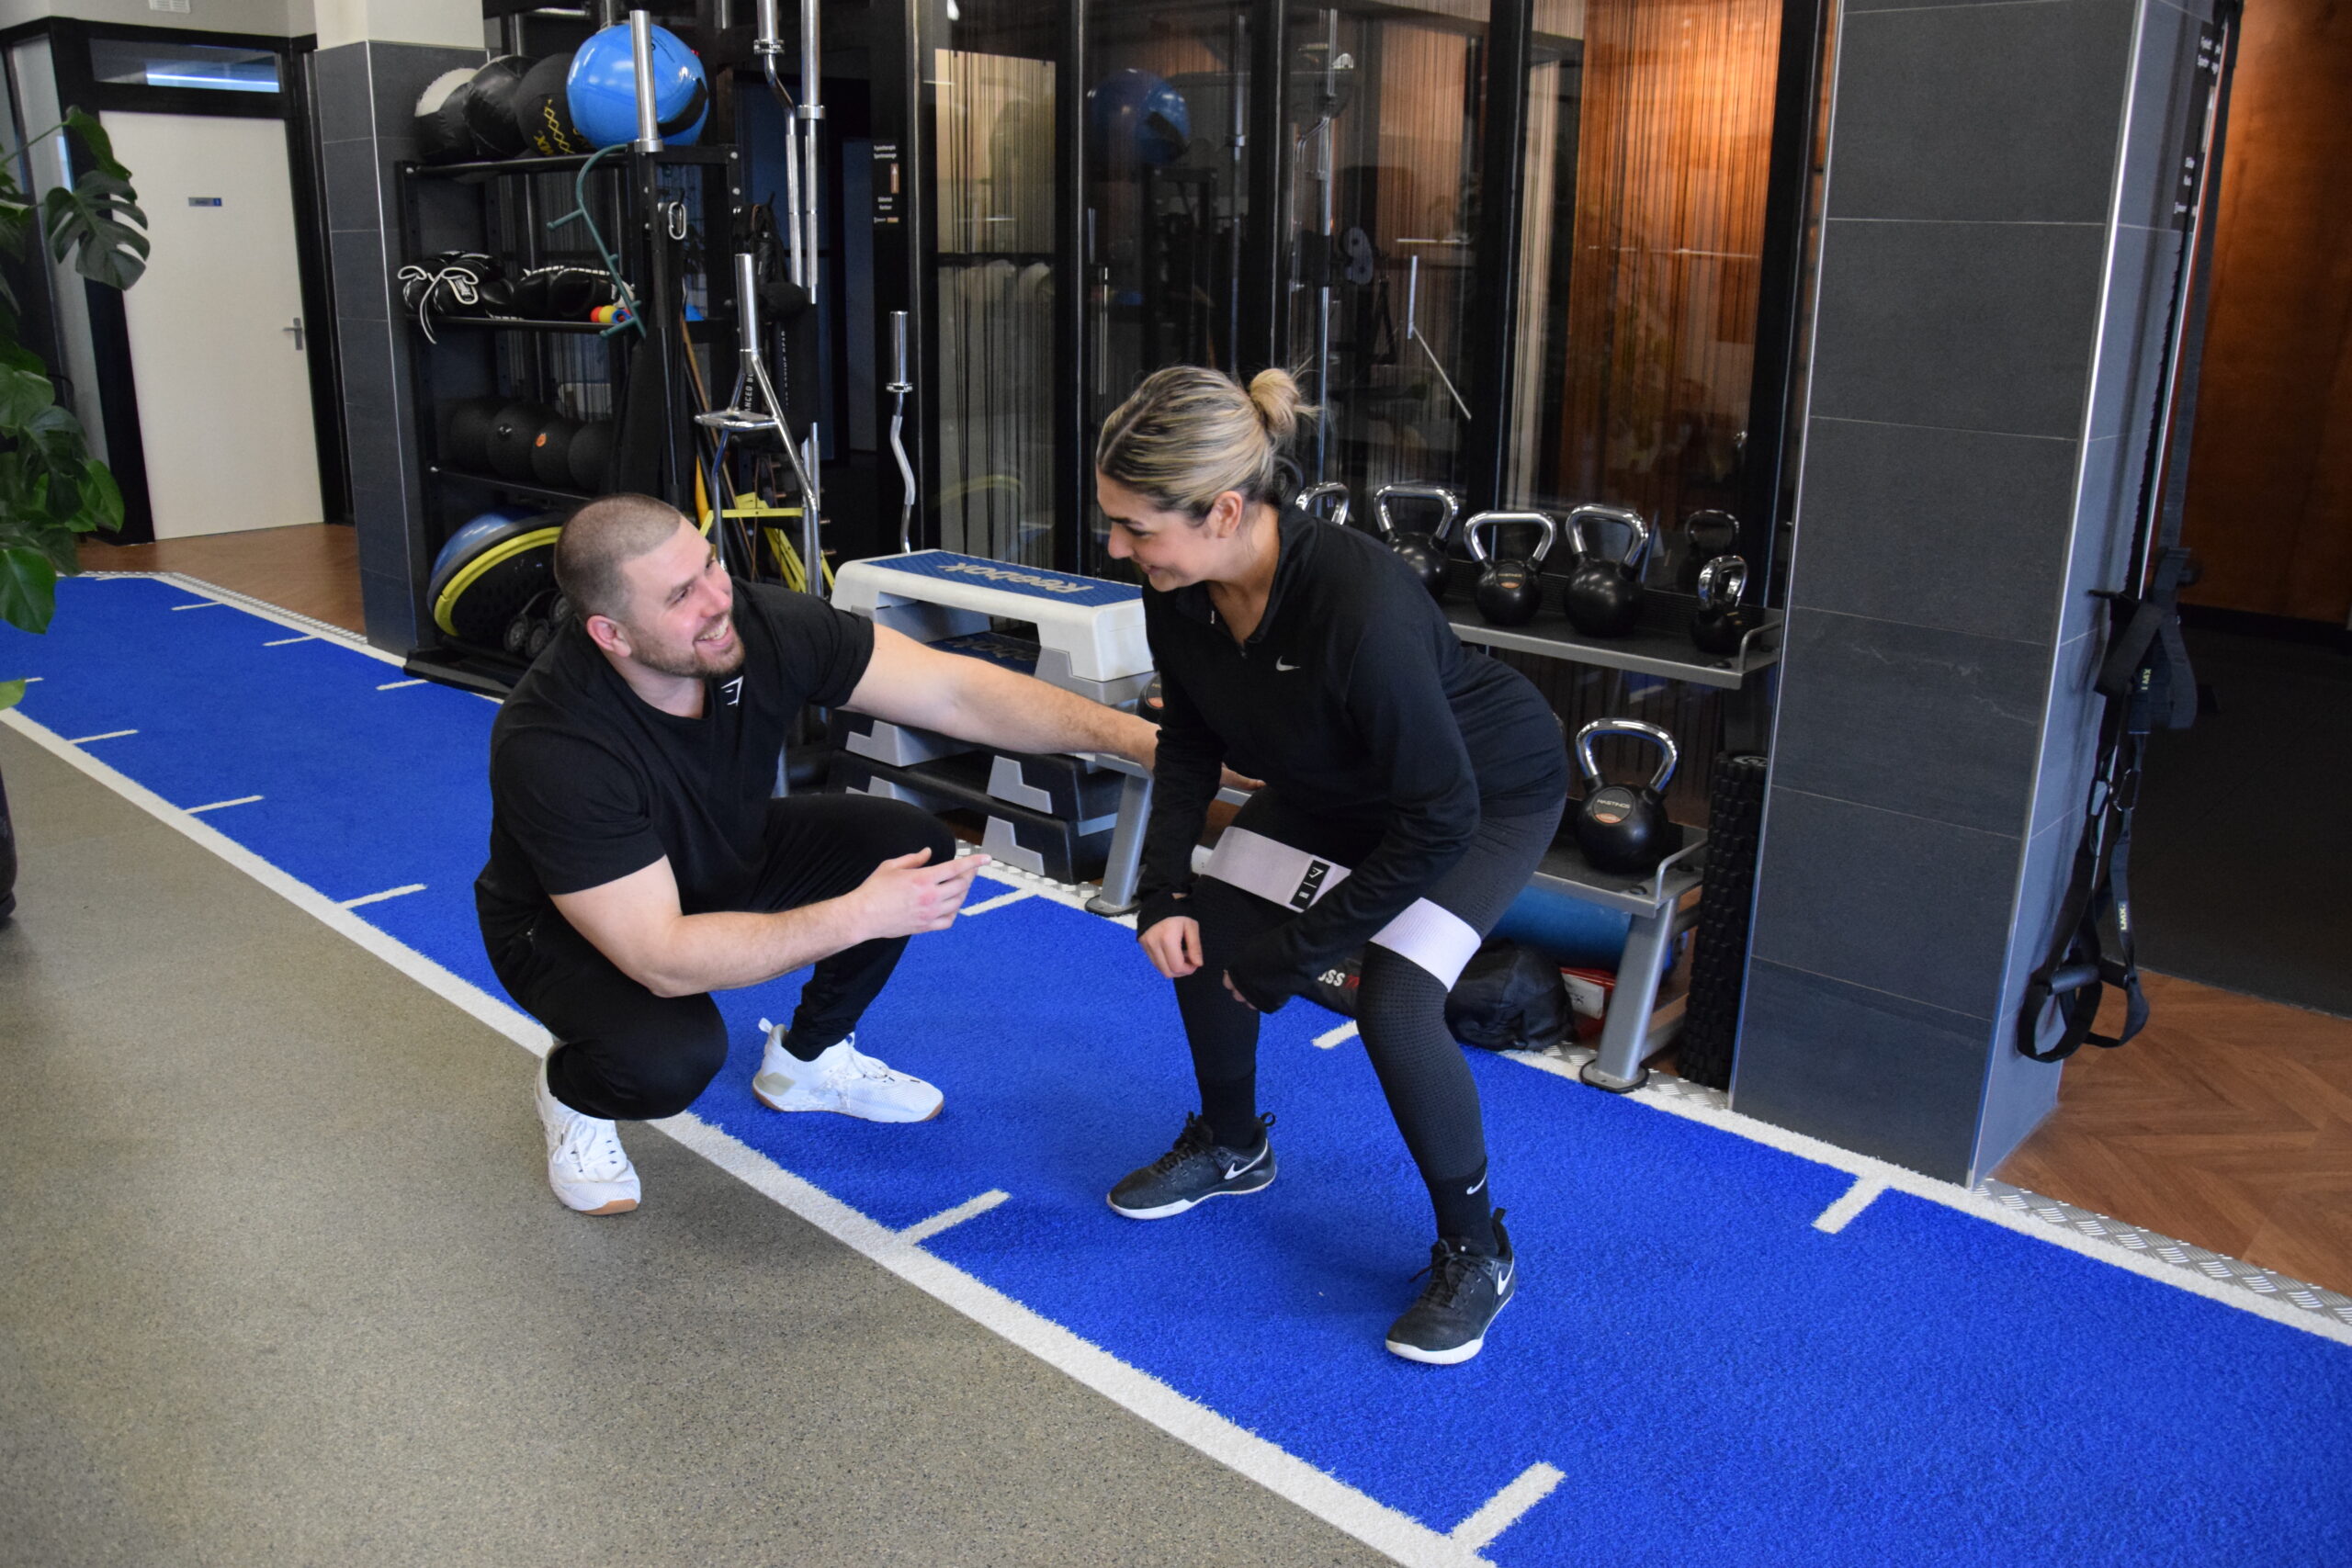 Coach/trainer giving cues to a client that is performing a banded exercise.